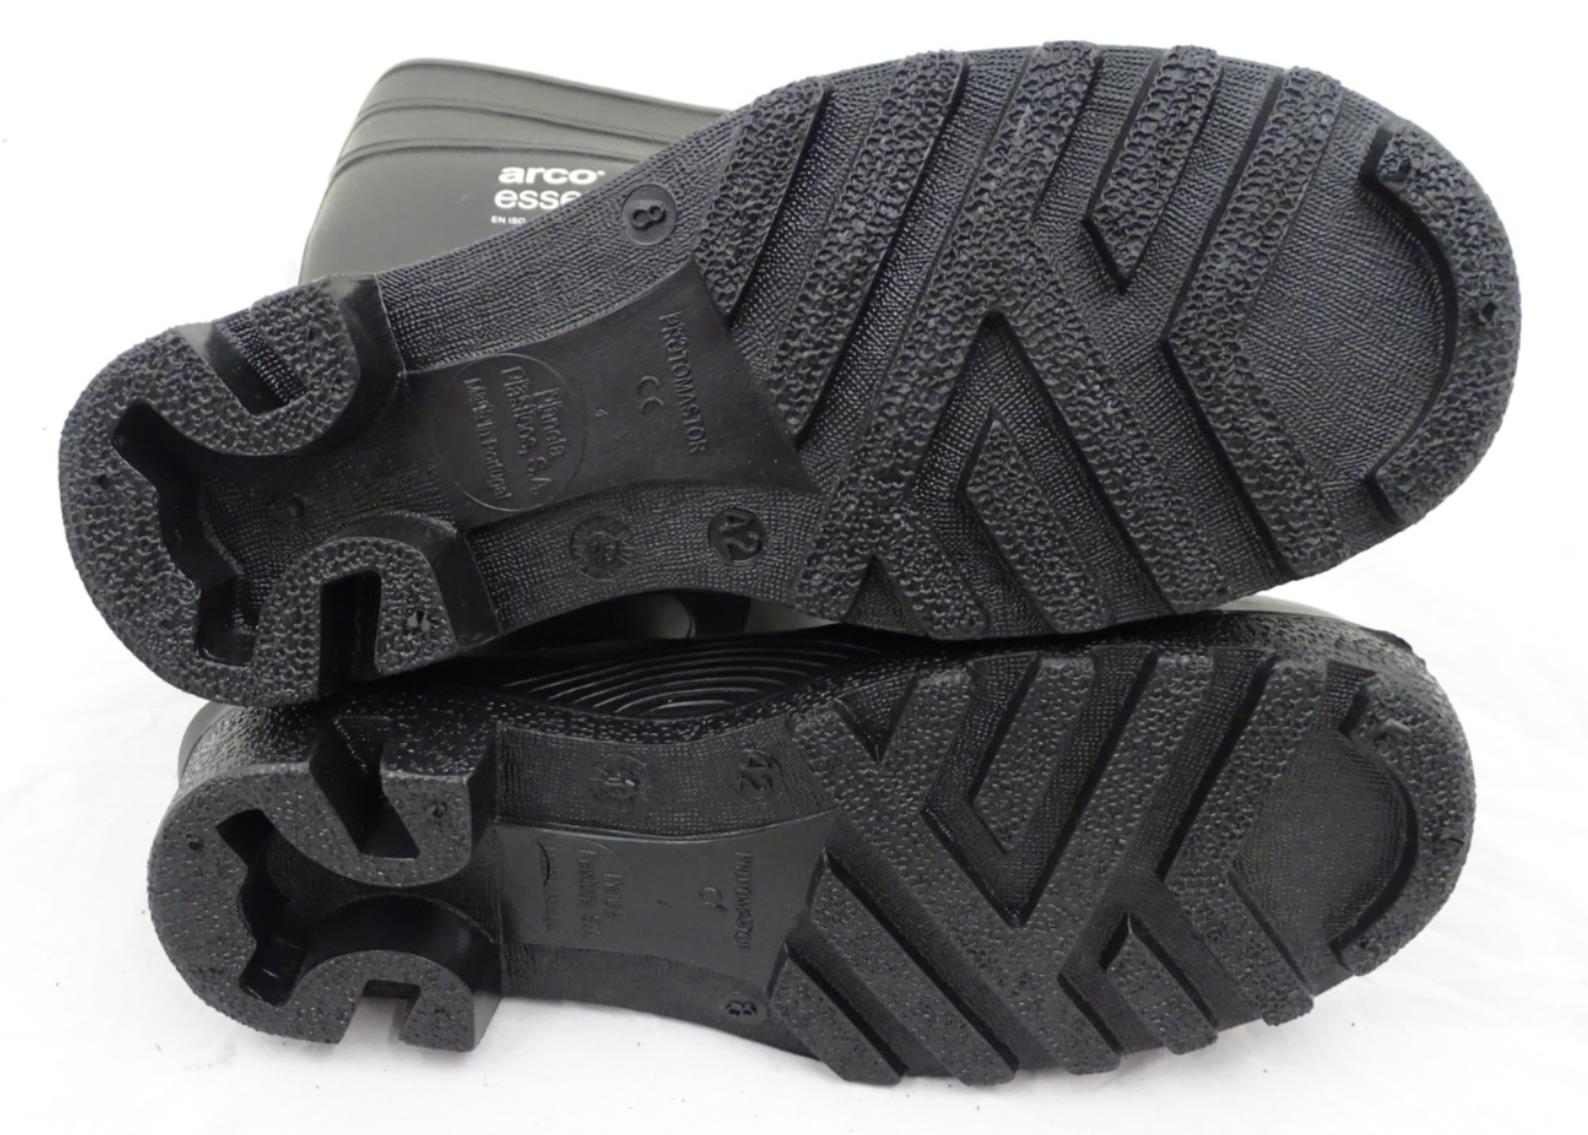 arco lightweight safety shoes